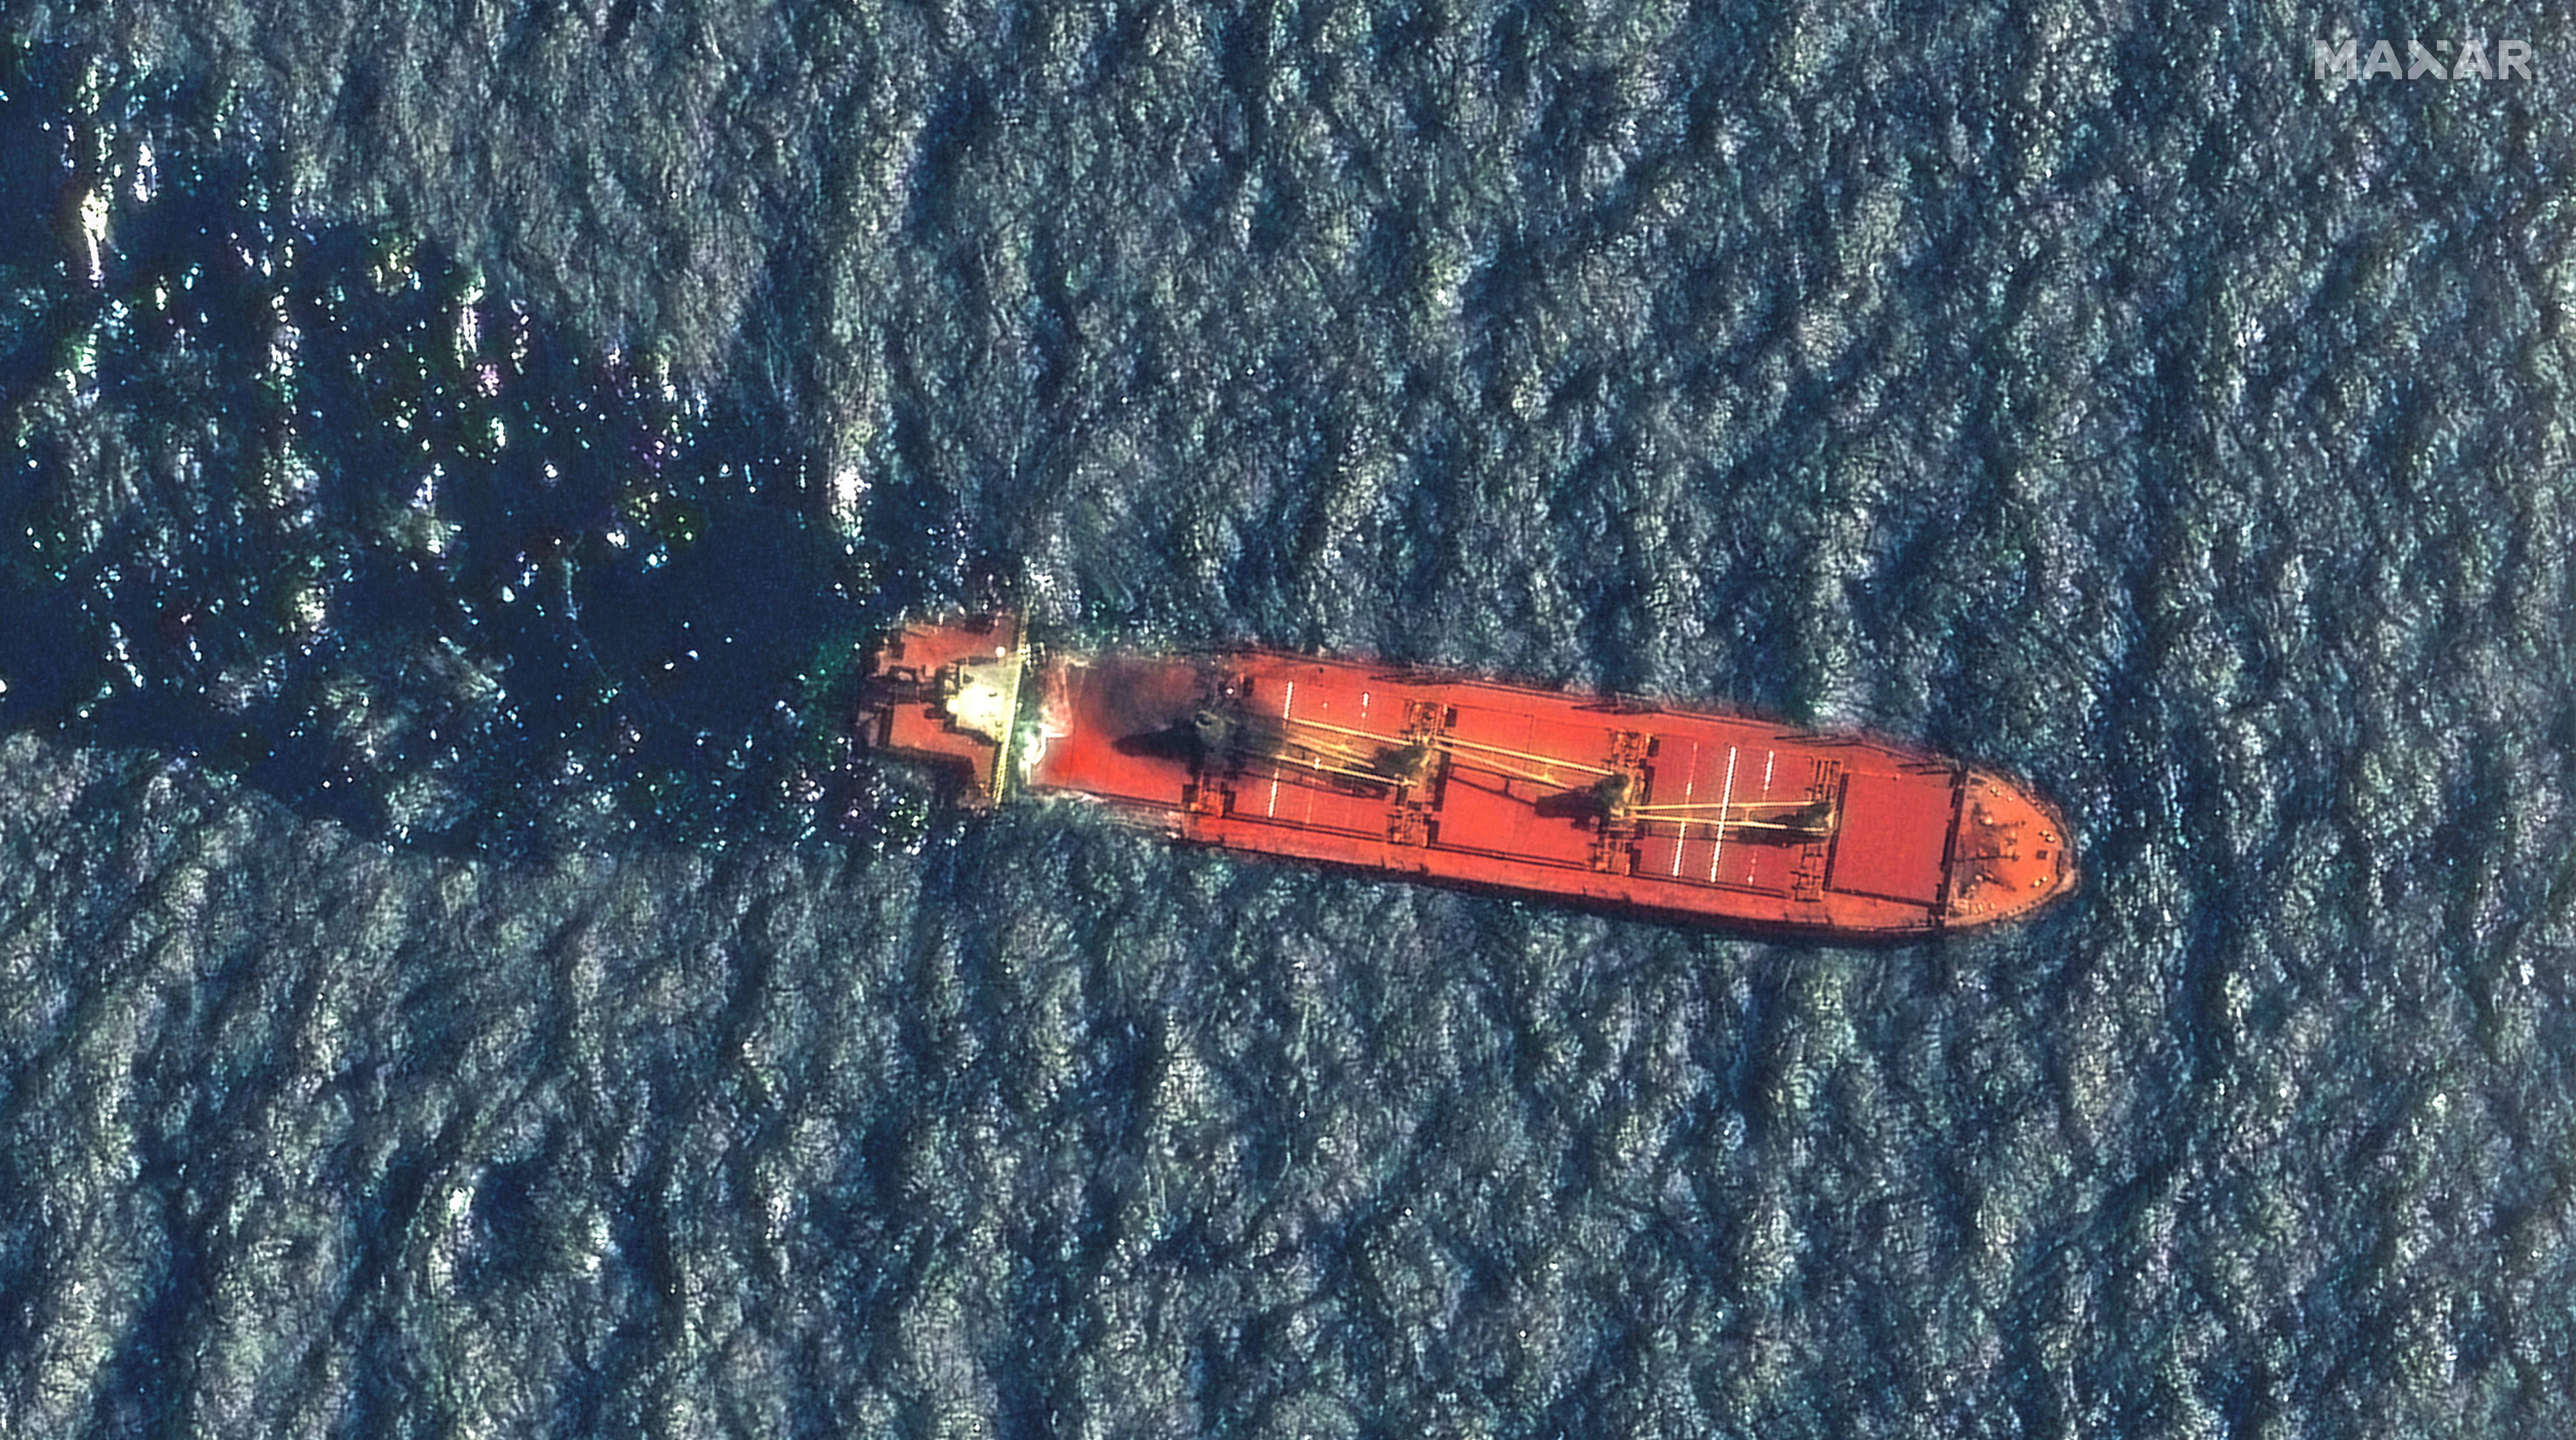 A satellite image shows the cargo ship Rubymar before it sank, on the Red Sea